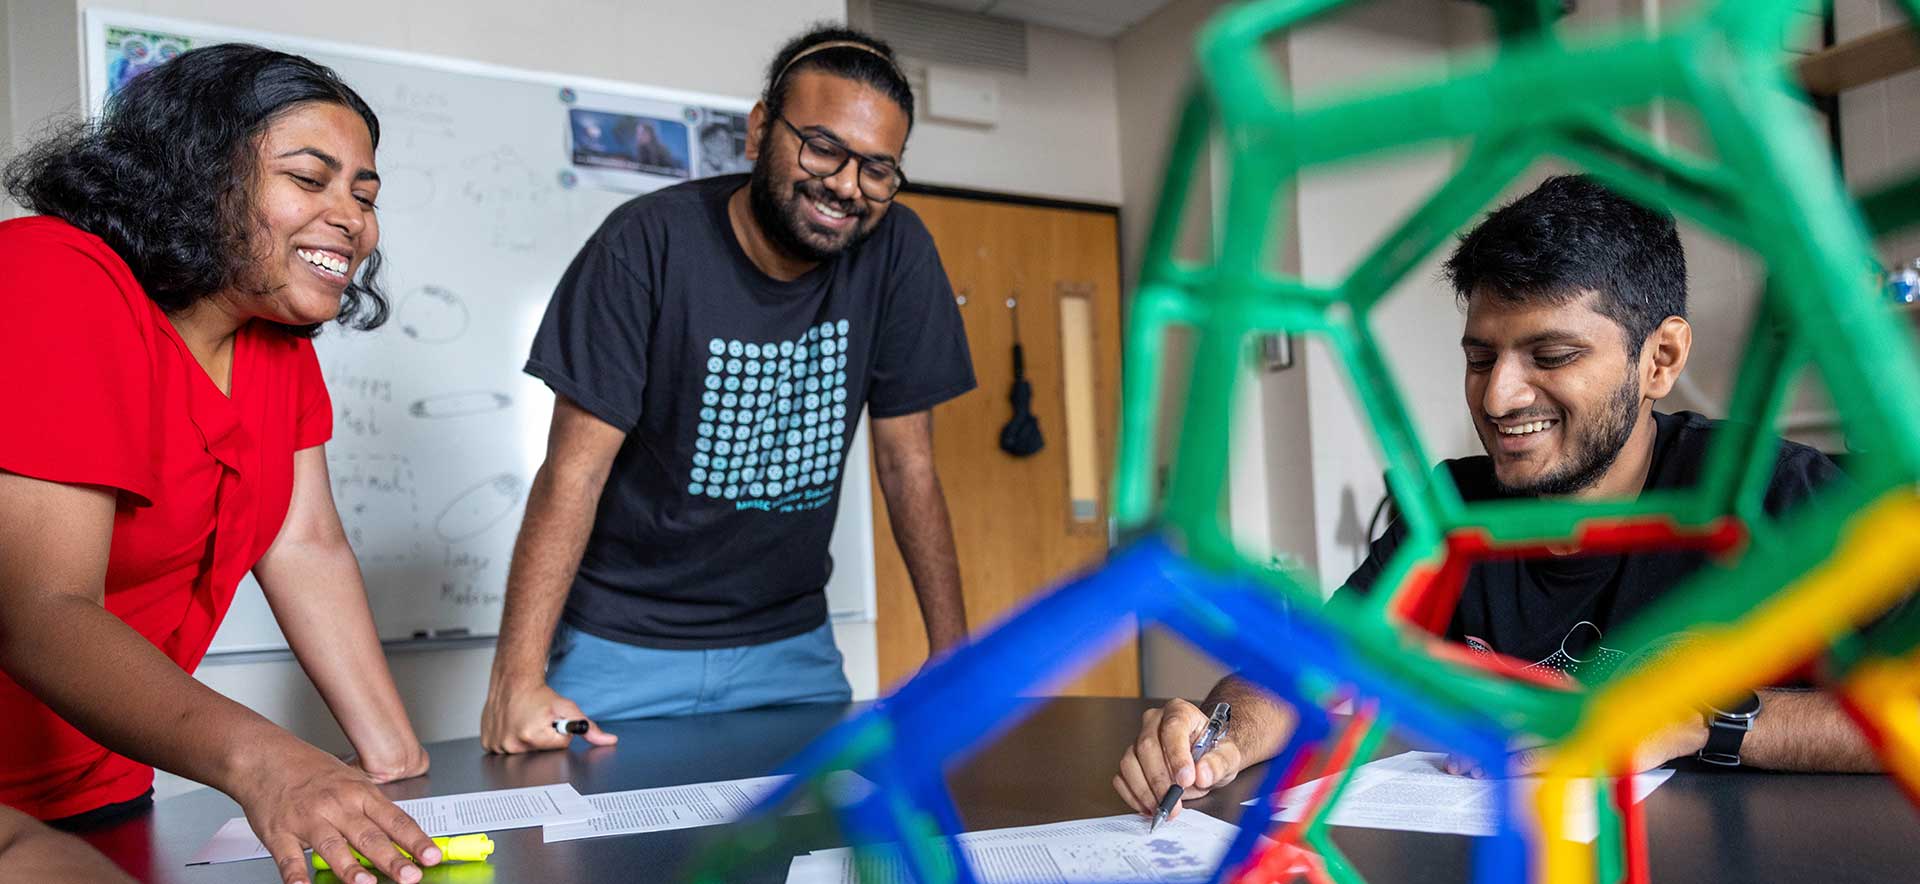 Graduate students work together in a classroom. One is viewed through a 3D geometric structure